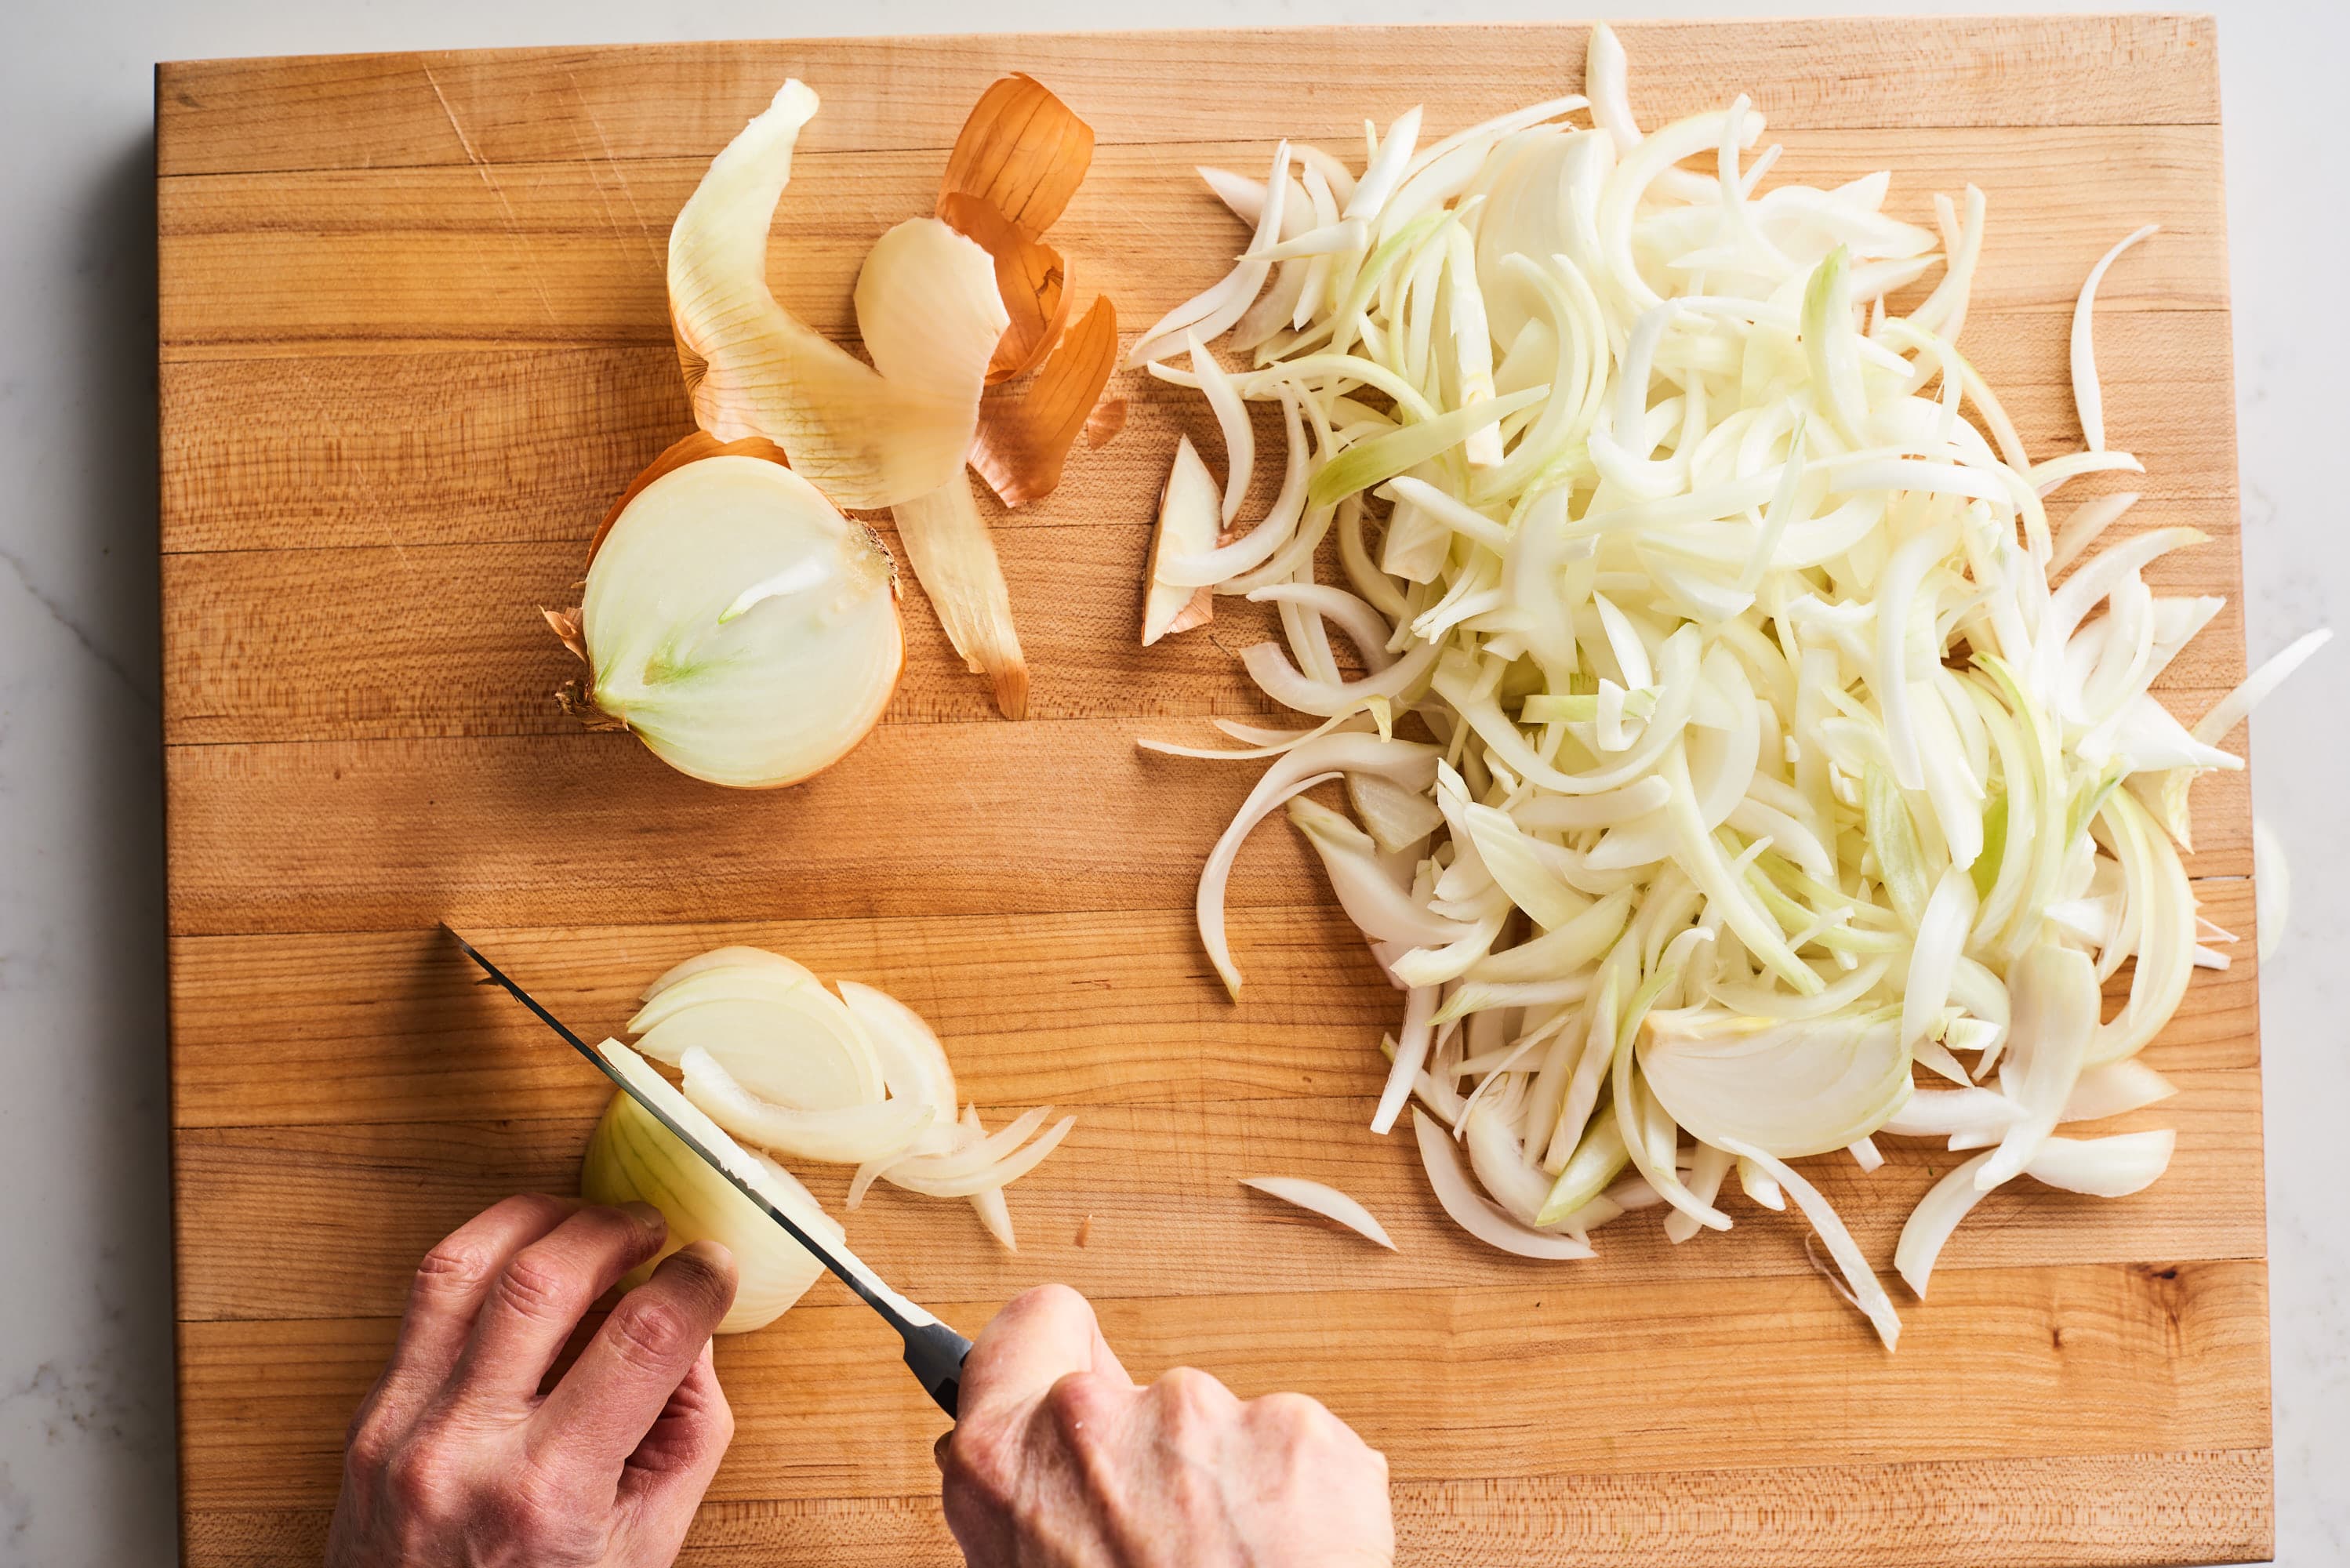 How To Chop An Onion {Step-by-Step Photos} - Savory Simple